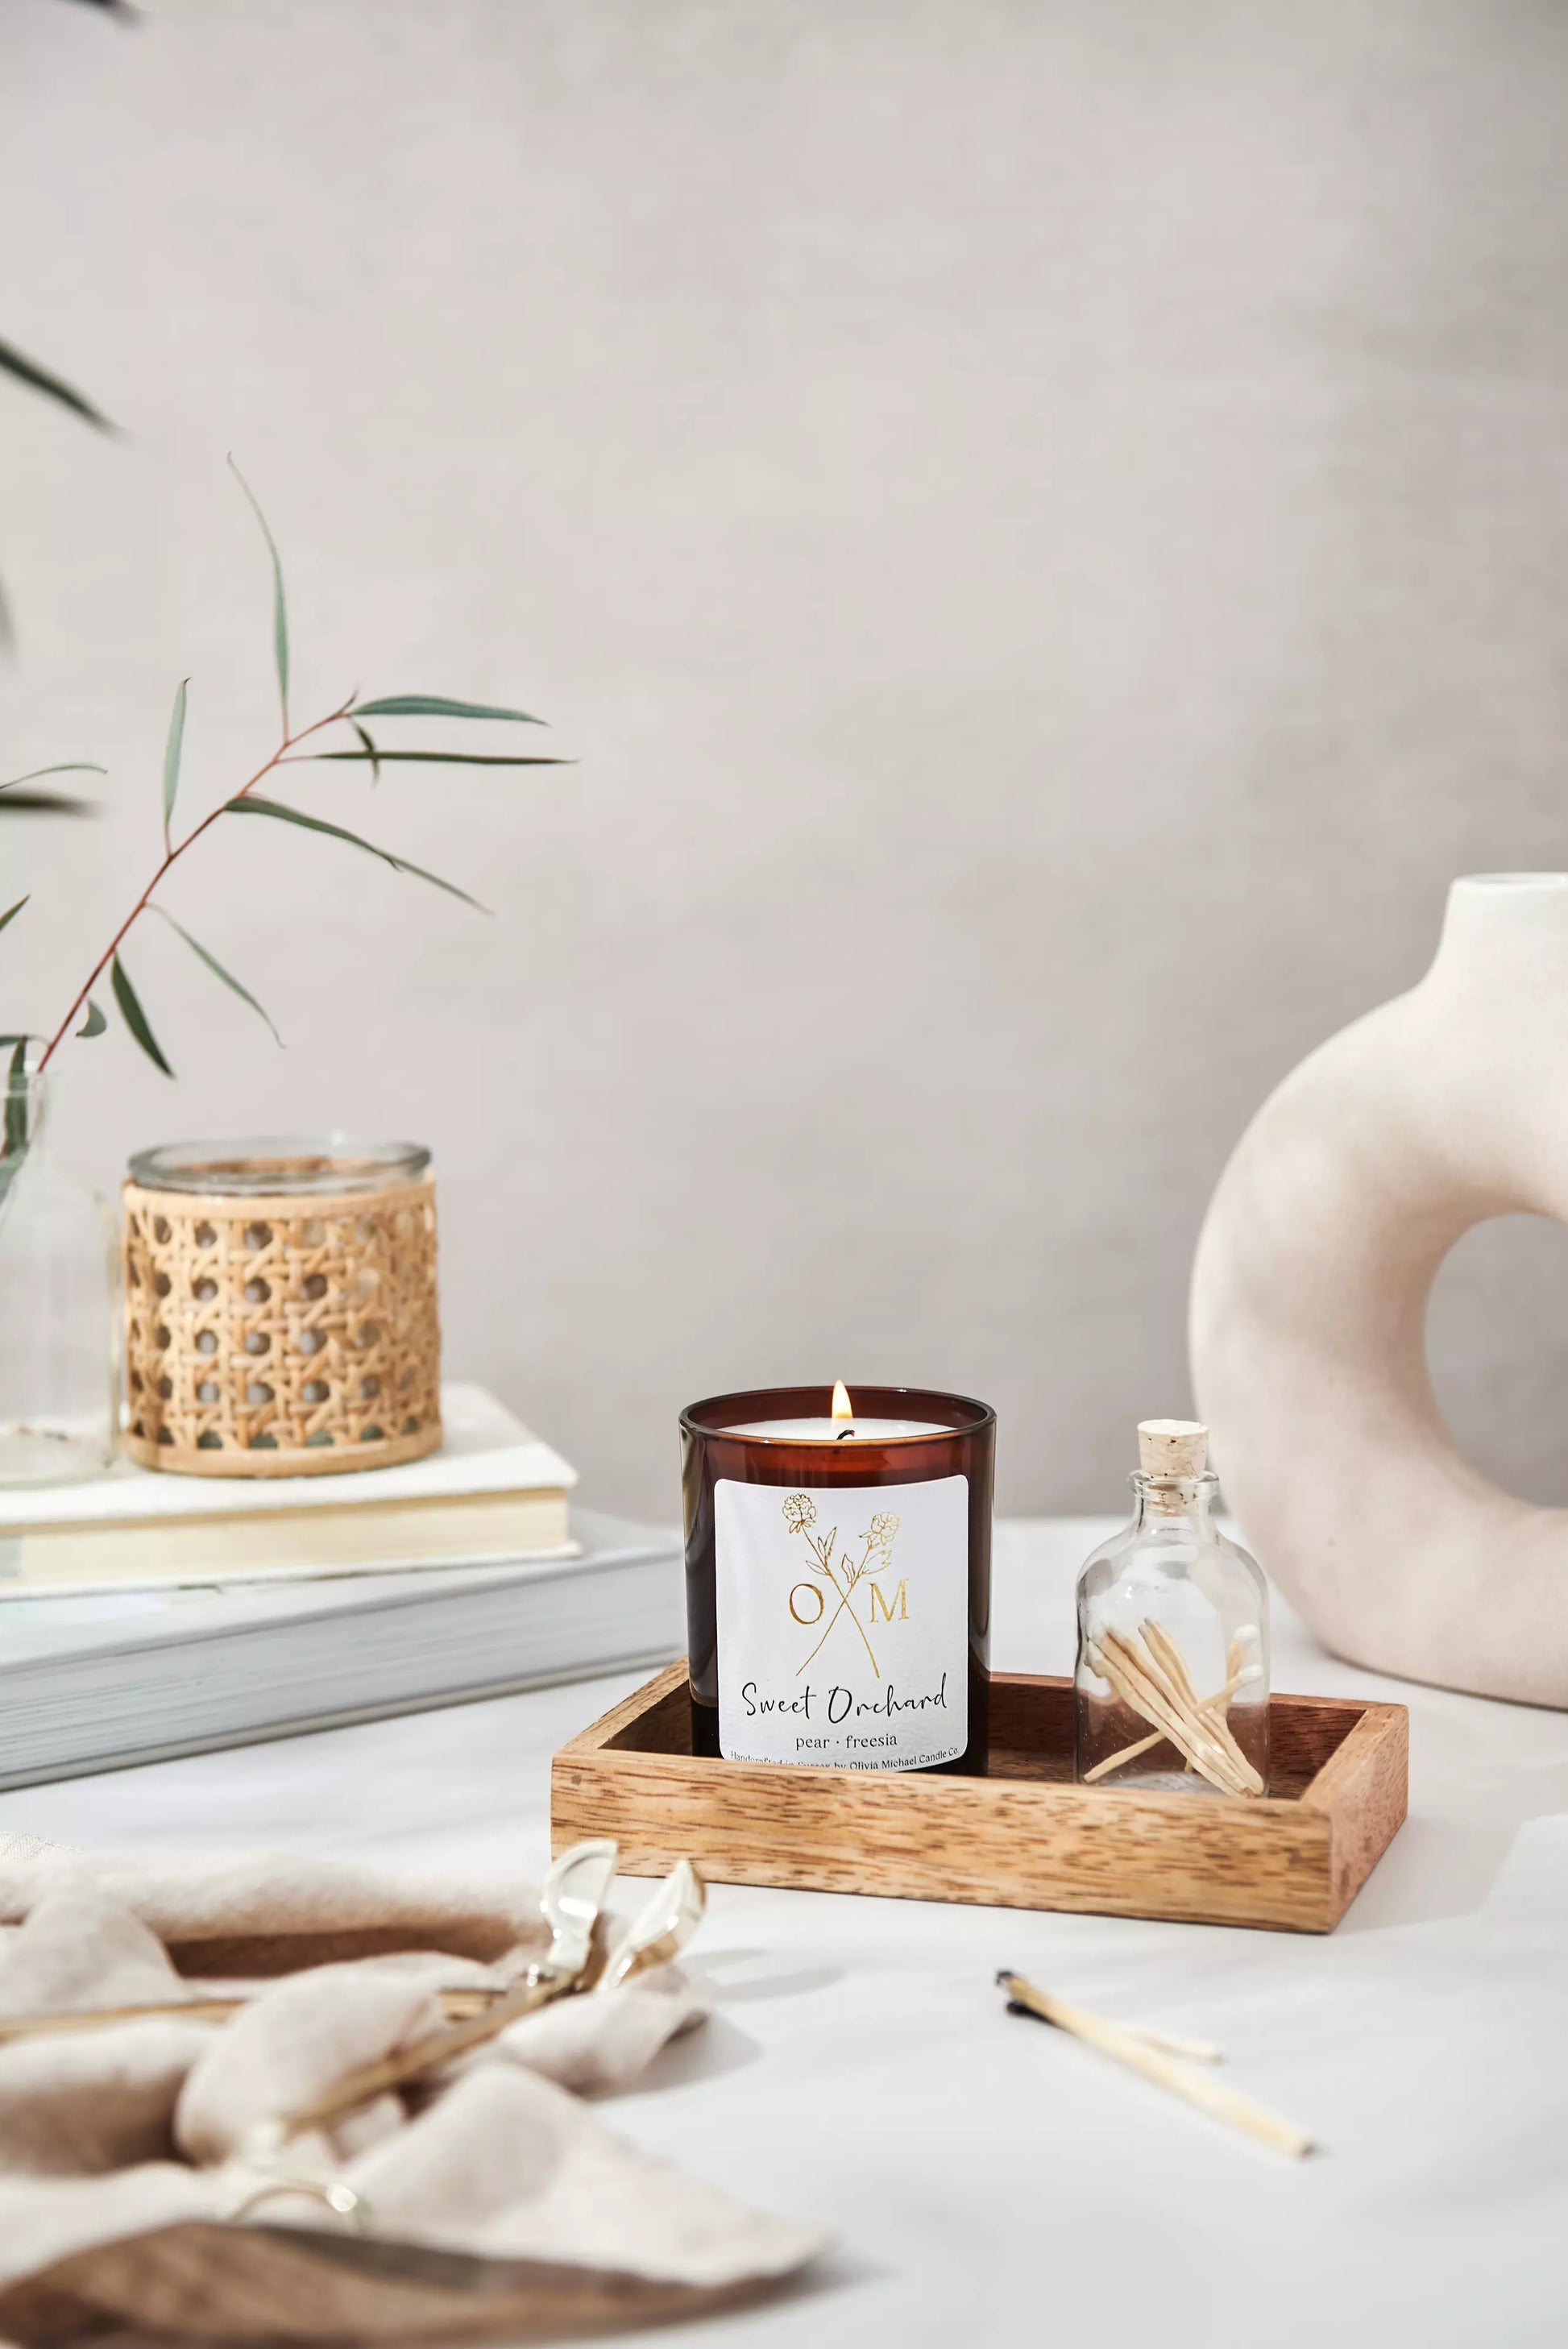 Our Sweet Orchard scented candle is lit and on display in an amber glass jar.